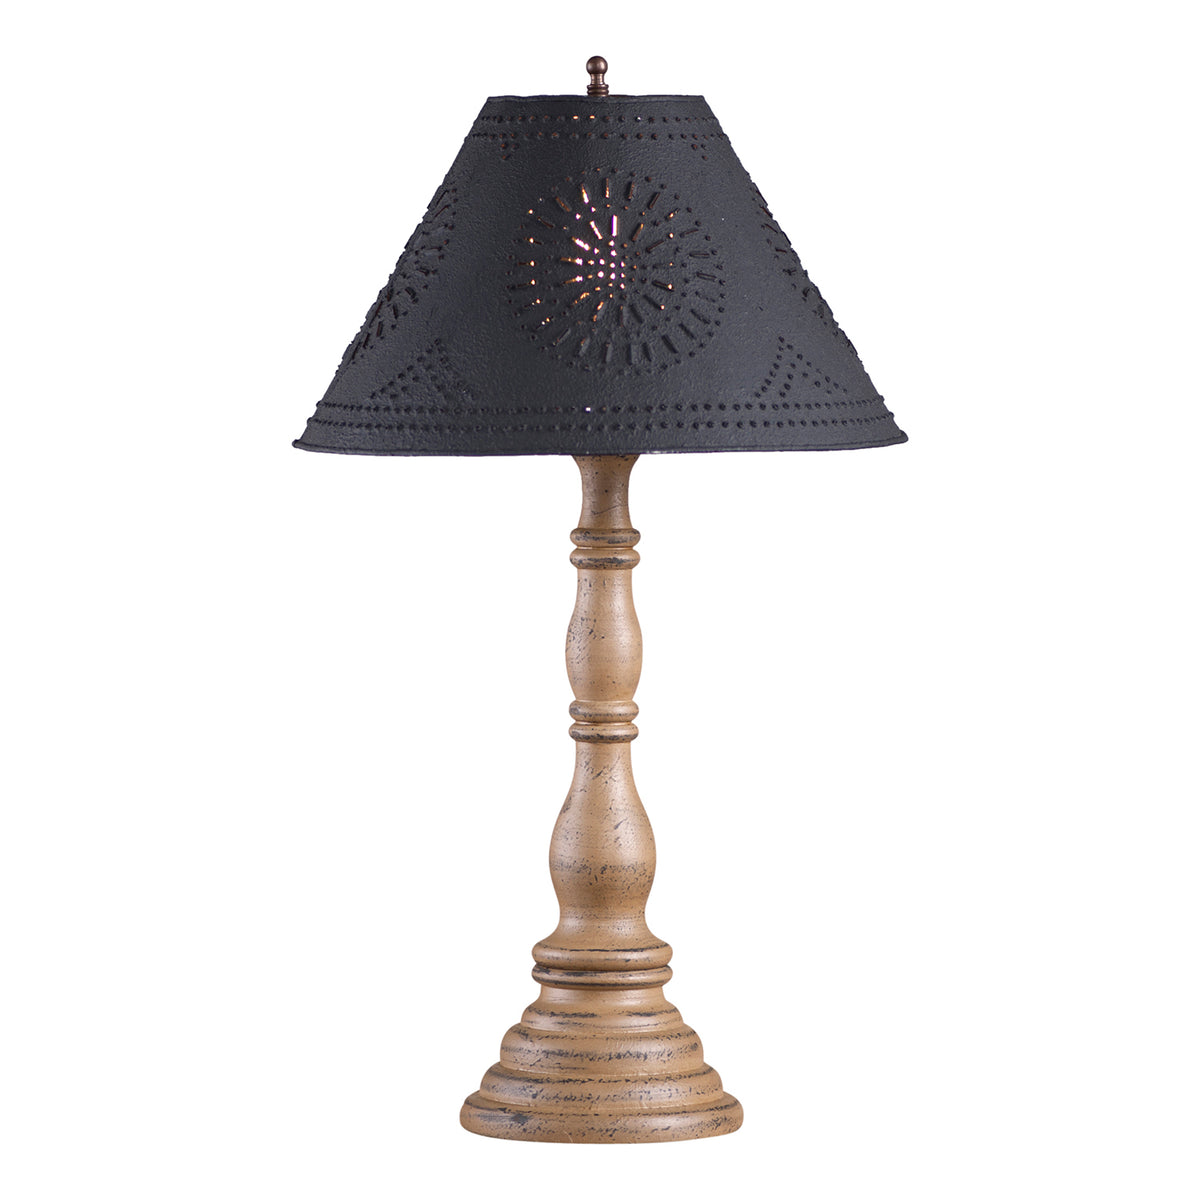 Davenport Lamp in Americana Pearwood with Textured Black Tin Shade